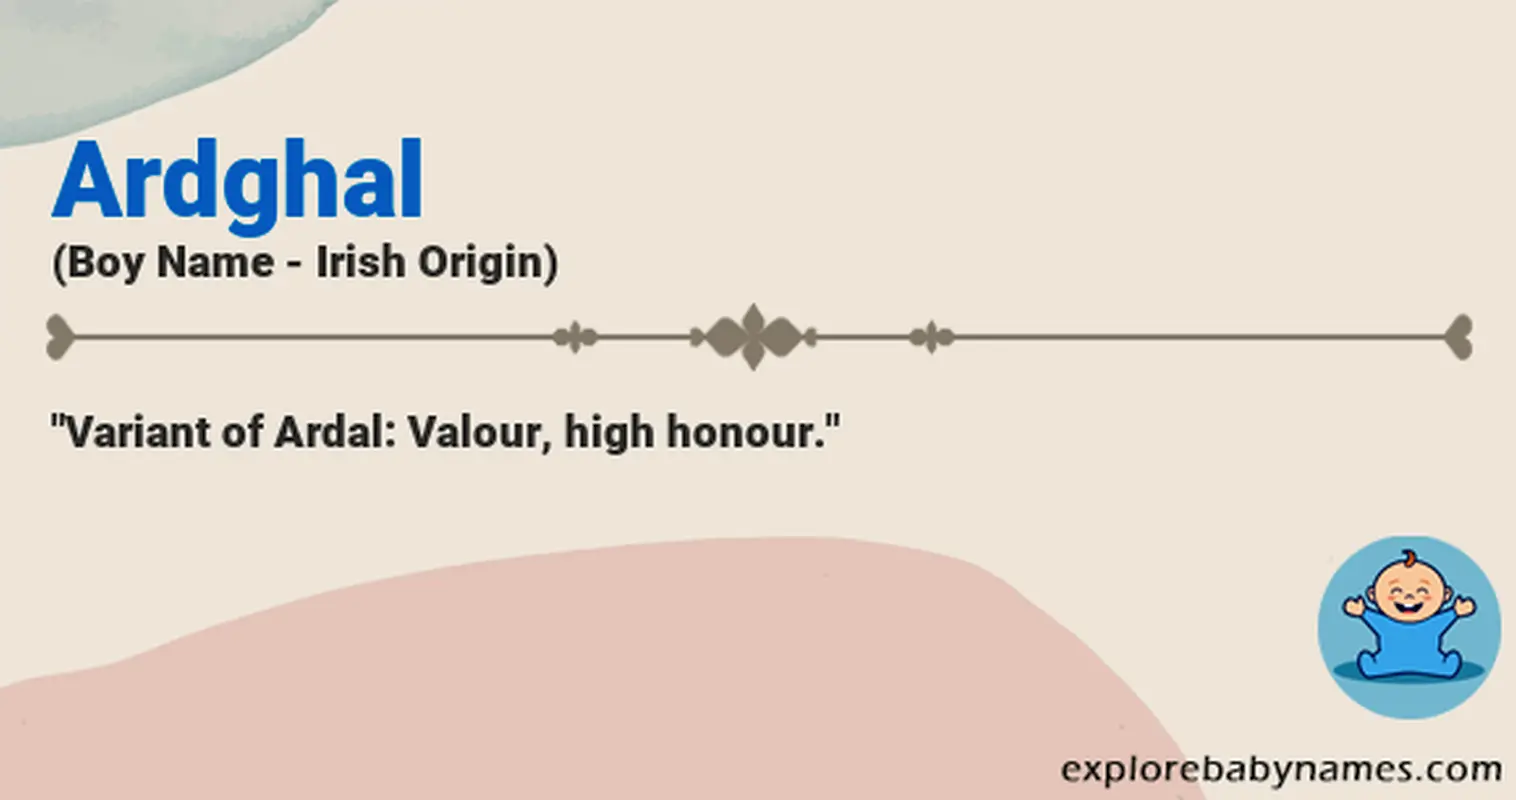 Meaning of Ardghal